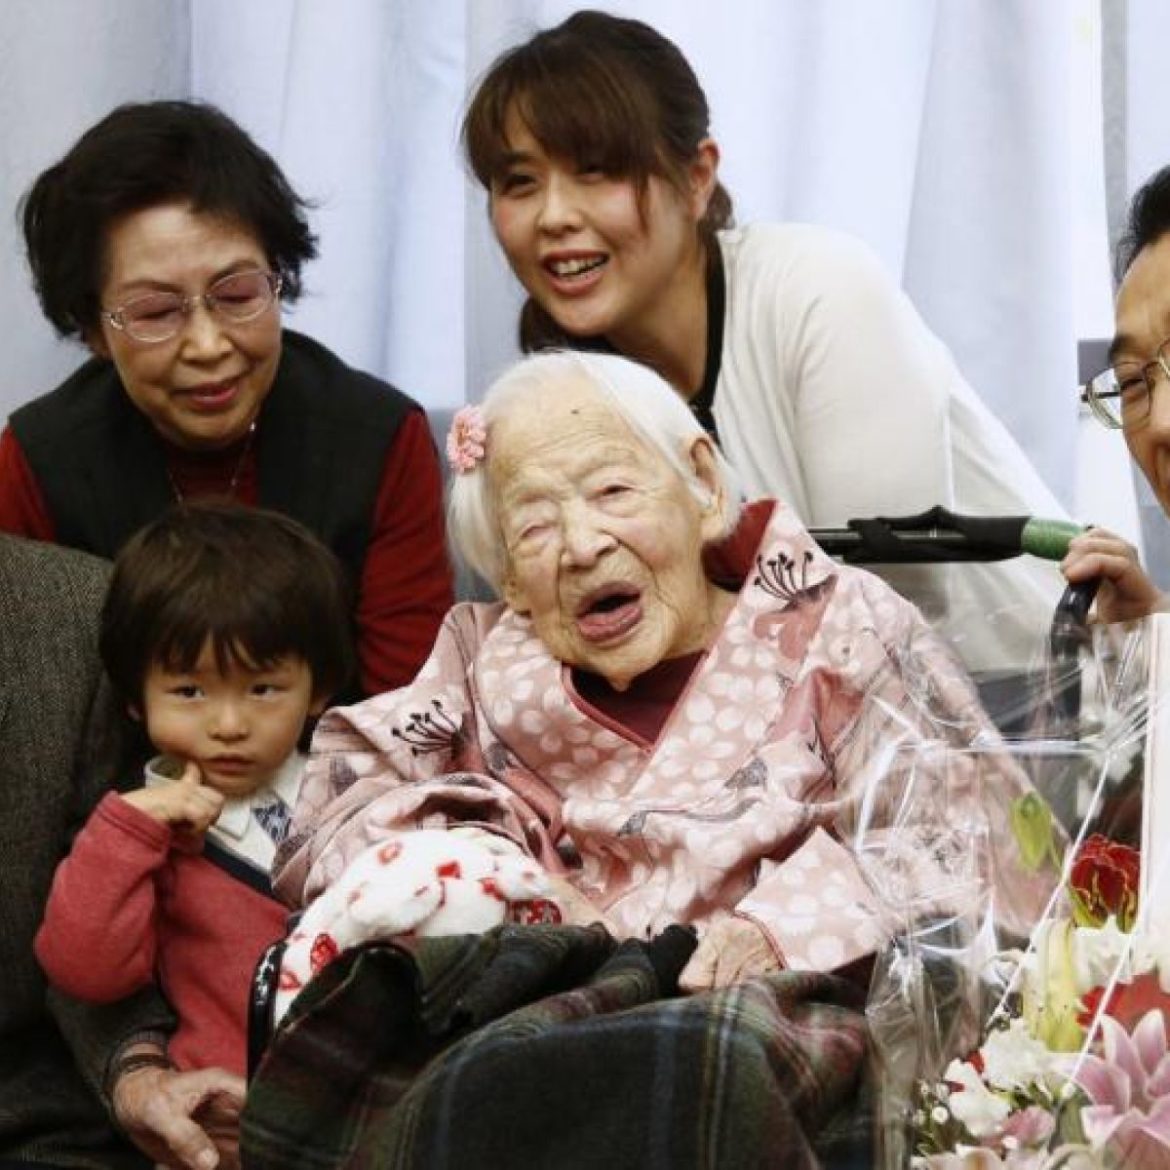 117-year-old woman who loves cola and boardgames, breaks another record